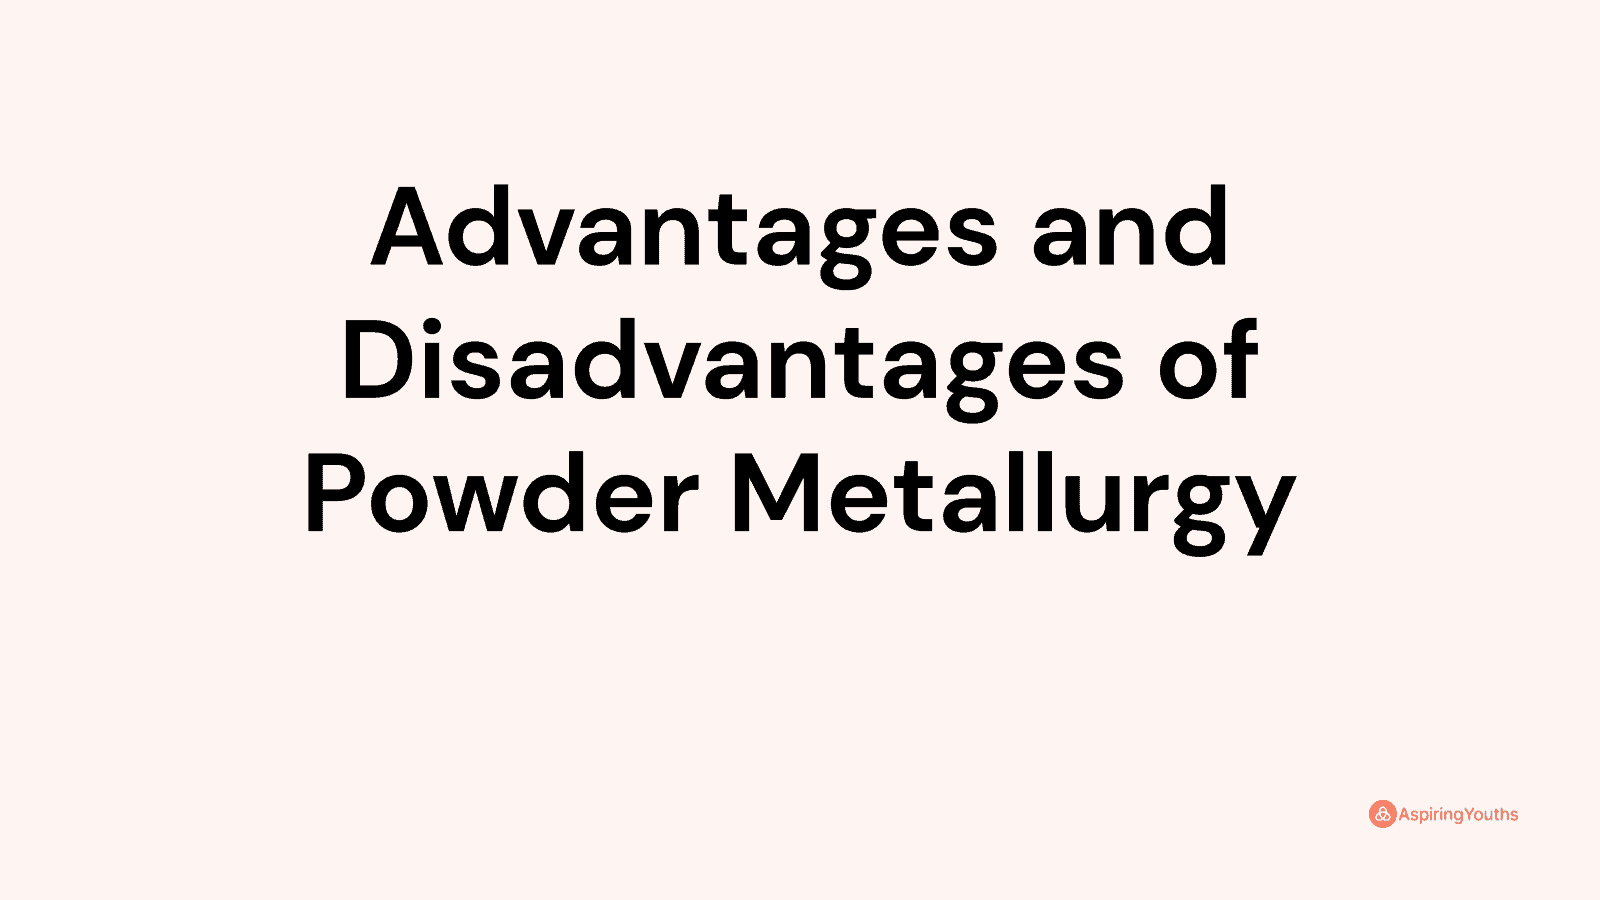 Advantages and disadvantages of Powder Metallurgy